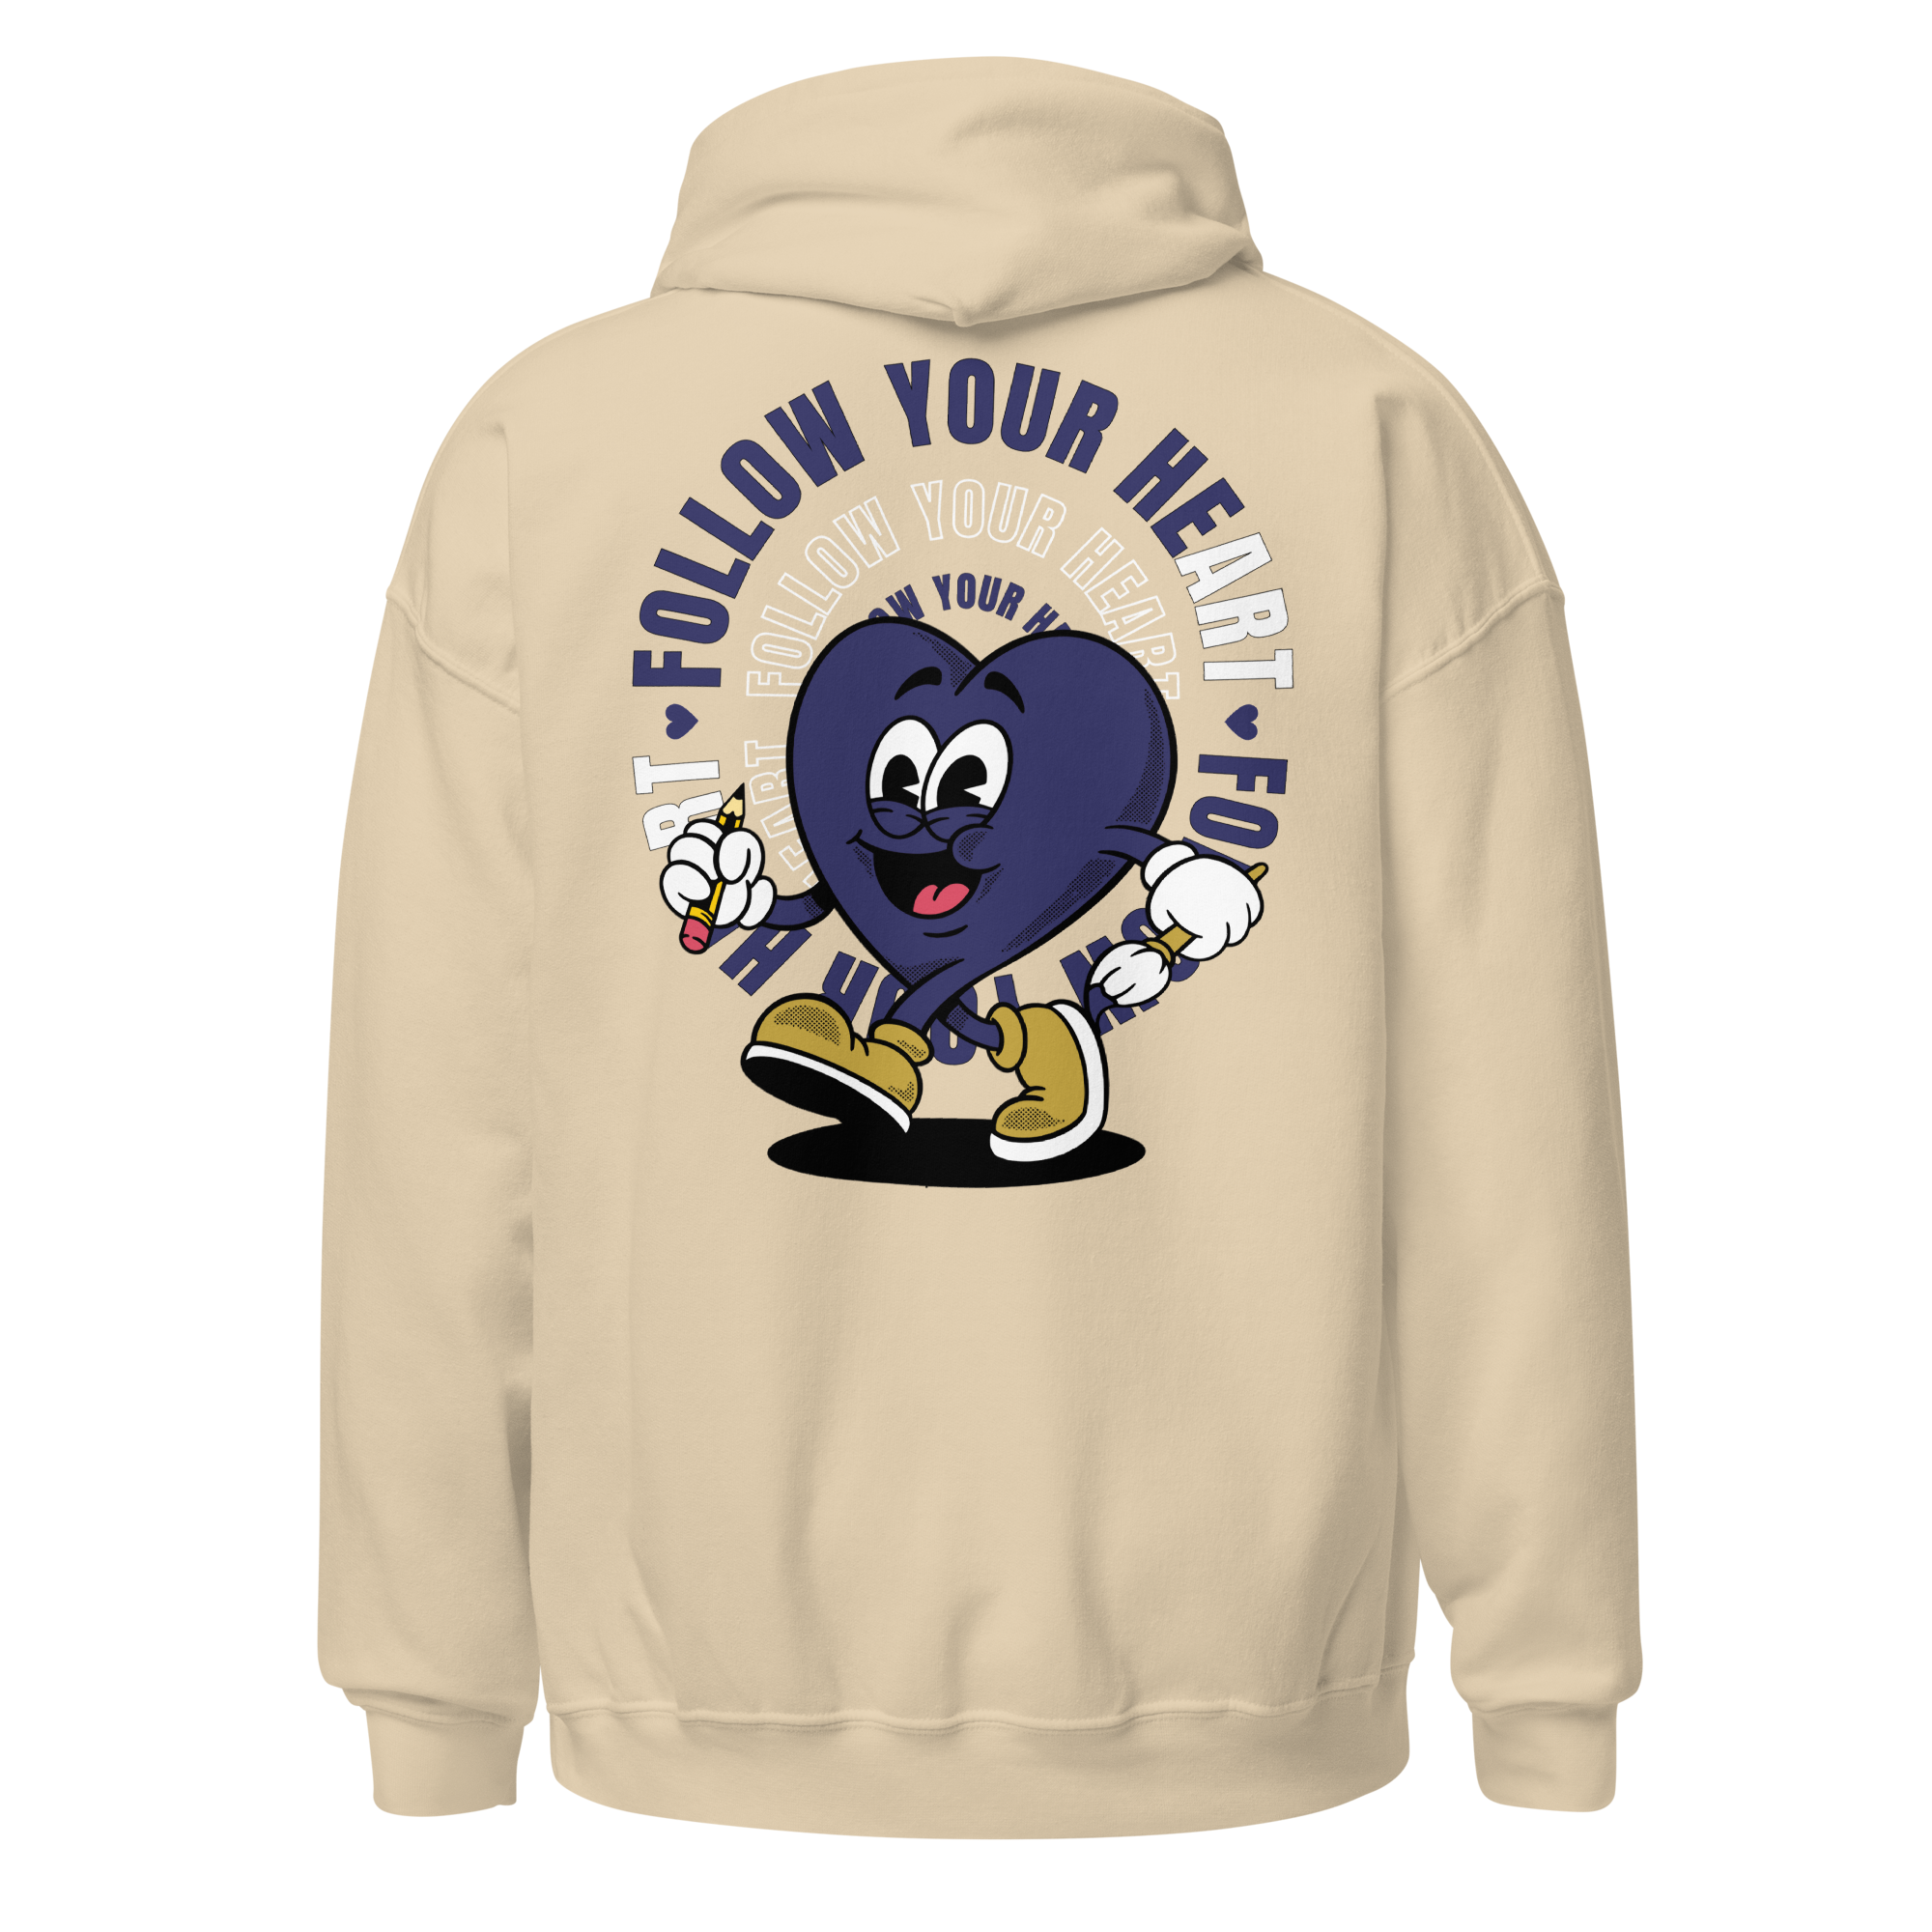 Follow Your Heart Embroidery Hoodie - Navy and Tan (Unisex)